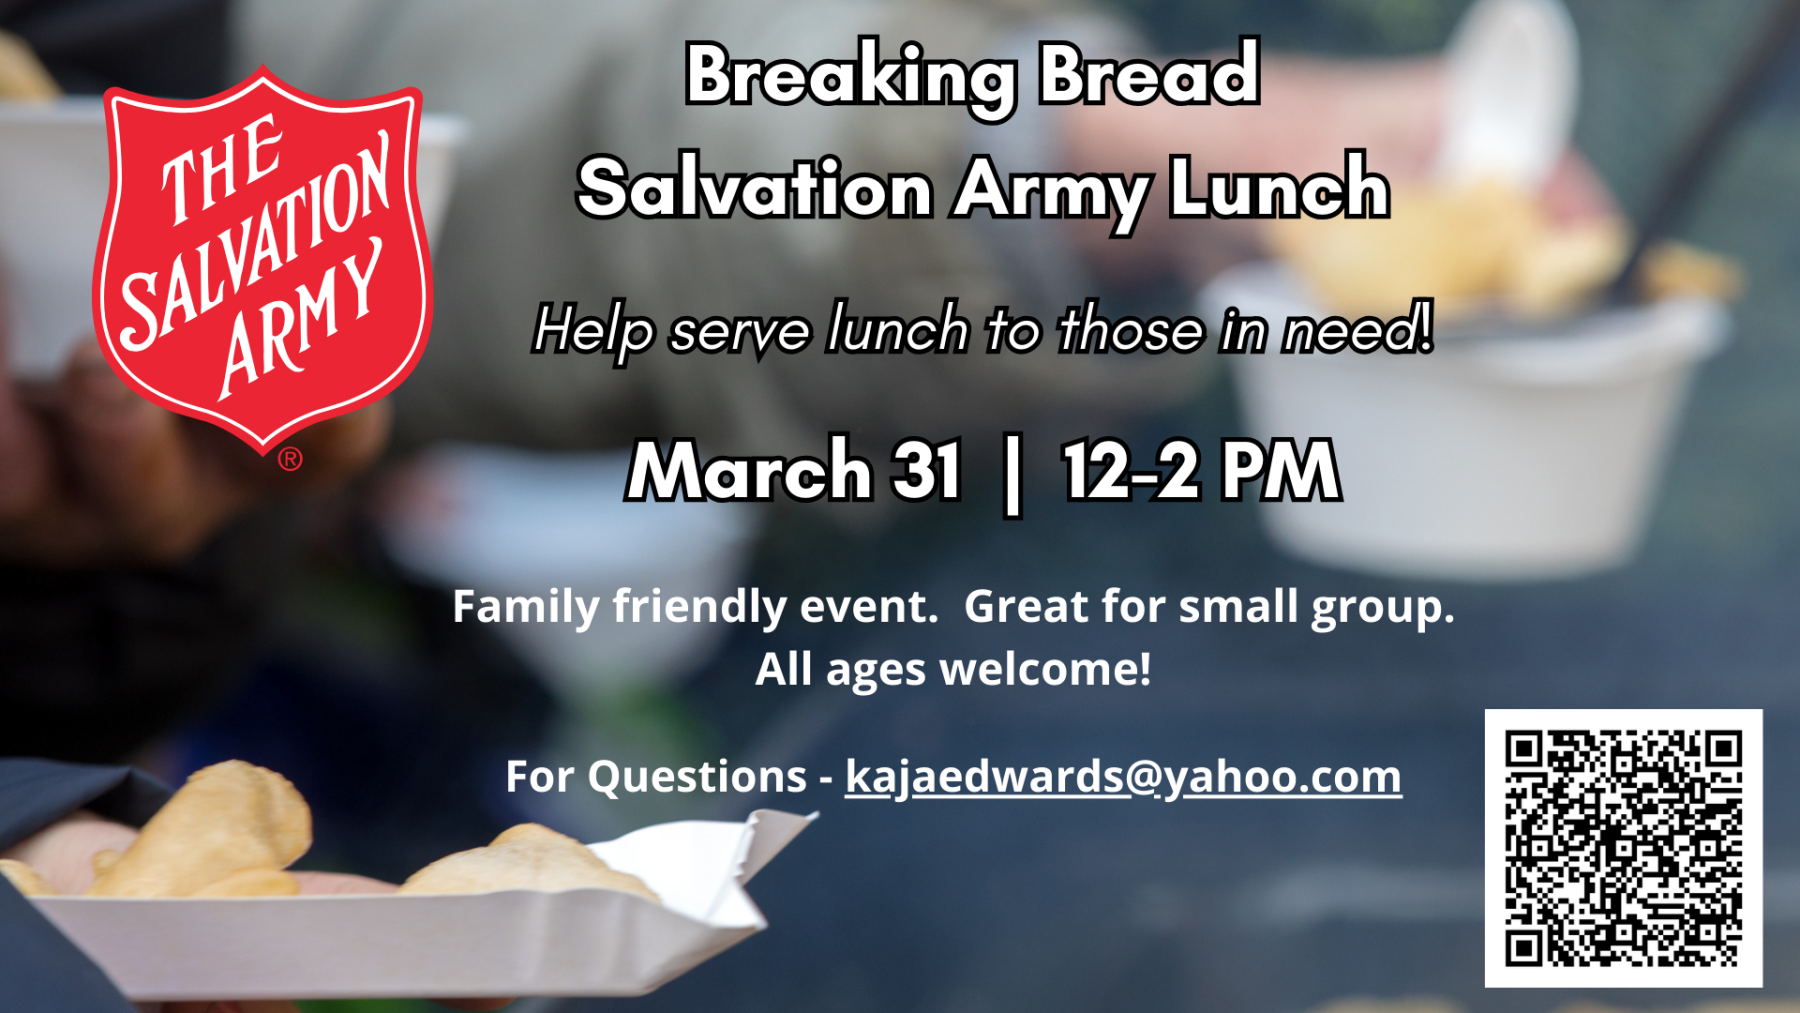 Breaking Bread Salvation Army Lunch